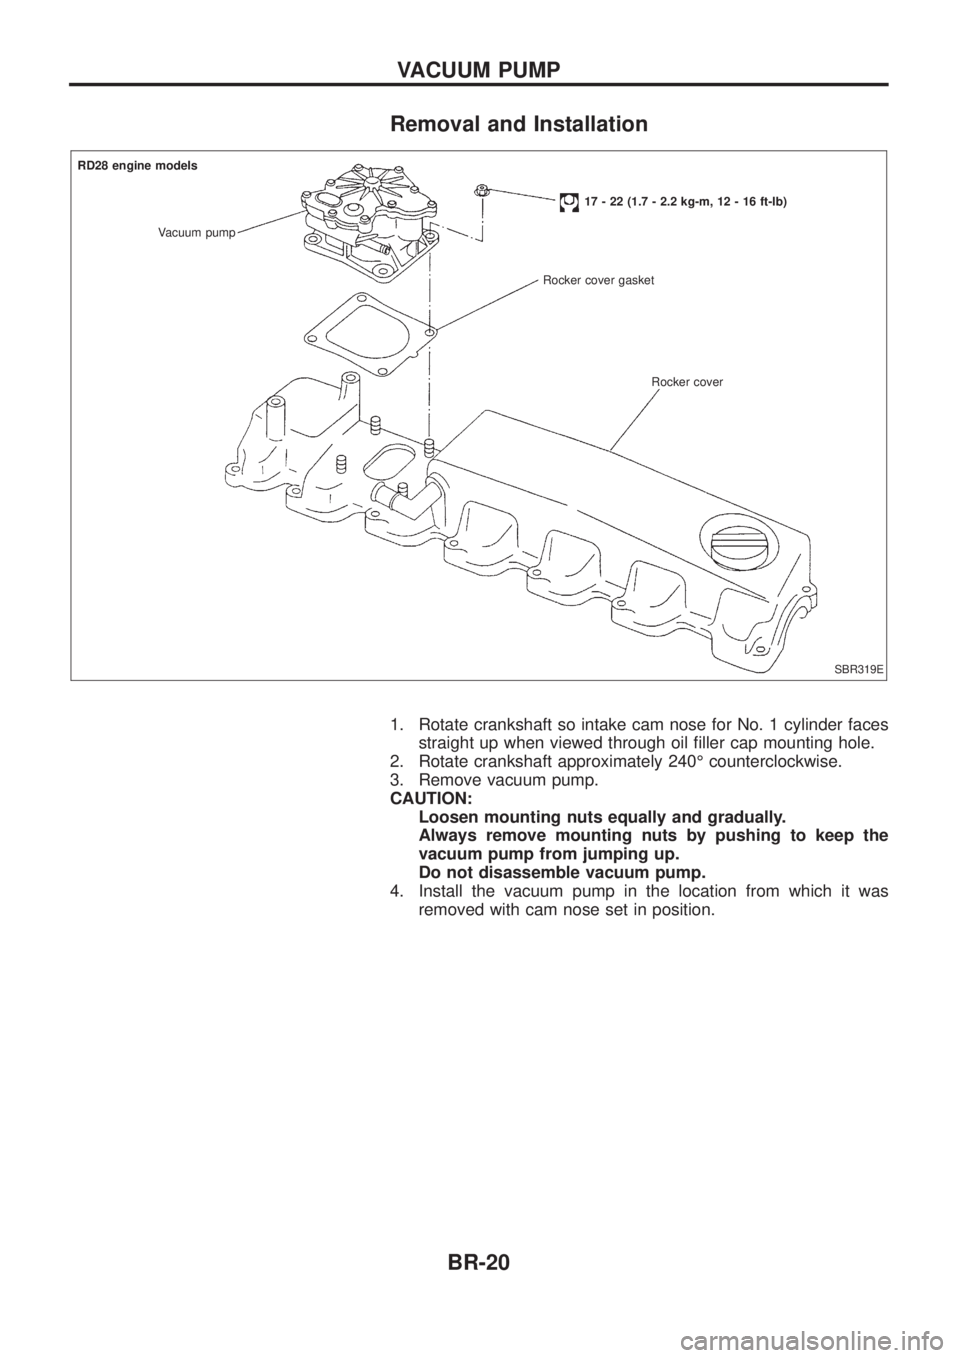 NISSAN PATROL 2006  Service Manual Removal and Installation
1. Rotate crankshaft so intake cam nose for No. 1 cylinder facesstraight up when viewed through oil ®ller cap mounting hole.
2. Rotate crankshaft approximately 240É counterc